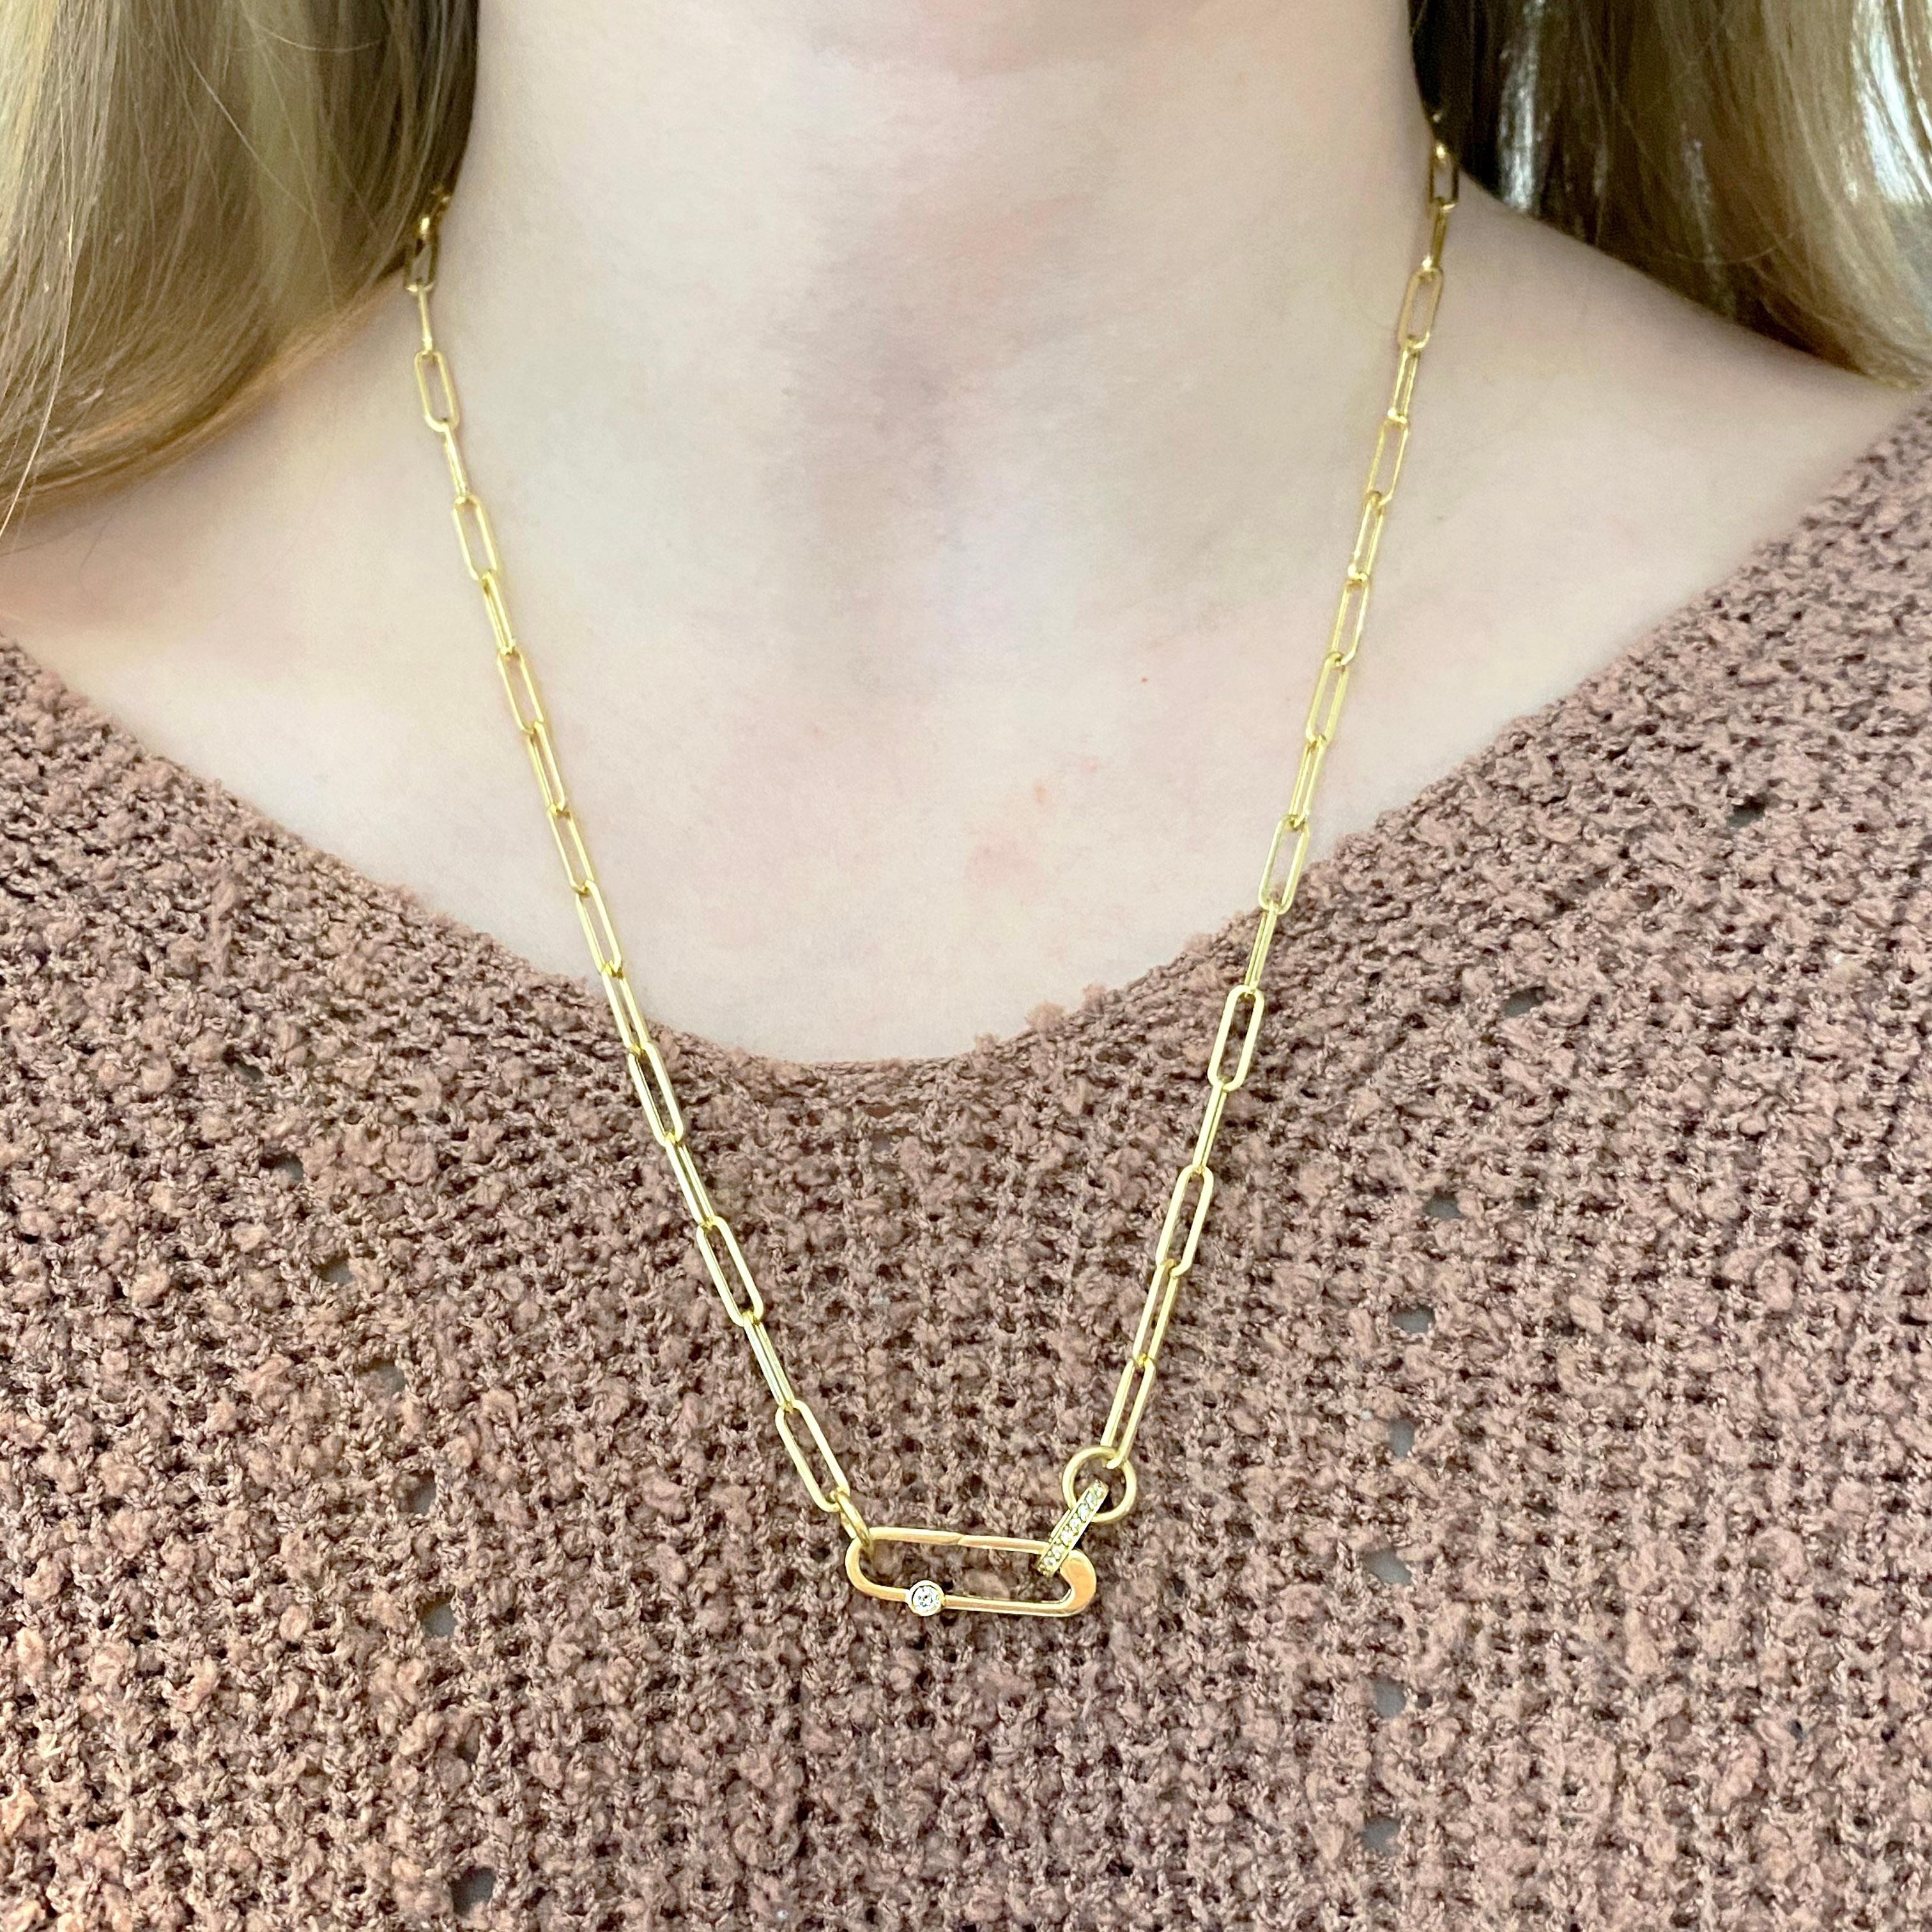 Latest 2021 Fine Jewelry Design: Paperclip chains meet personalization! This paperclip chain and charm design allows you to completely customize a look that fits YOU perfectly. The chain design has two open rings instead of a clasp that allow you to